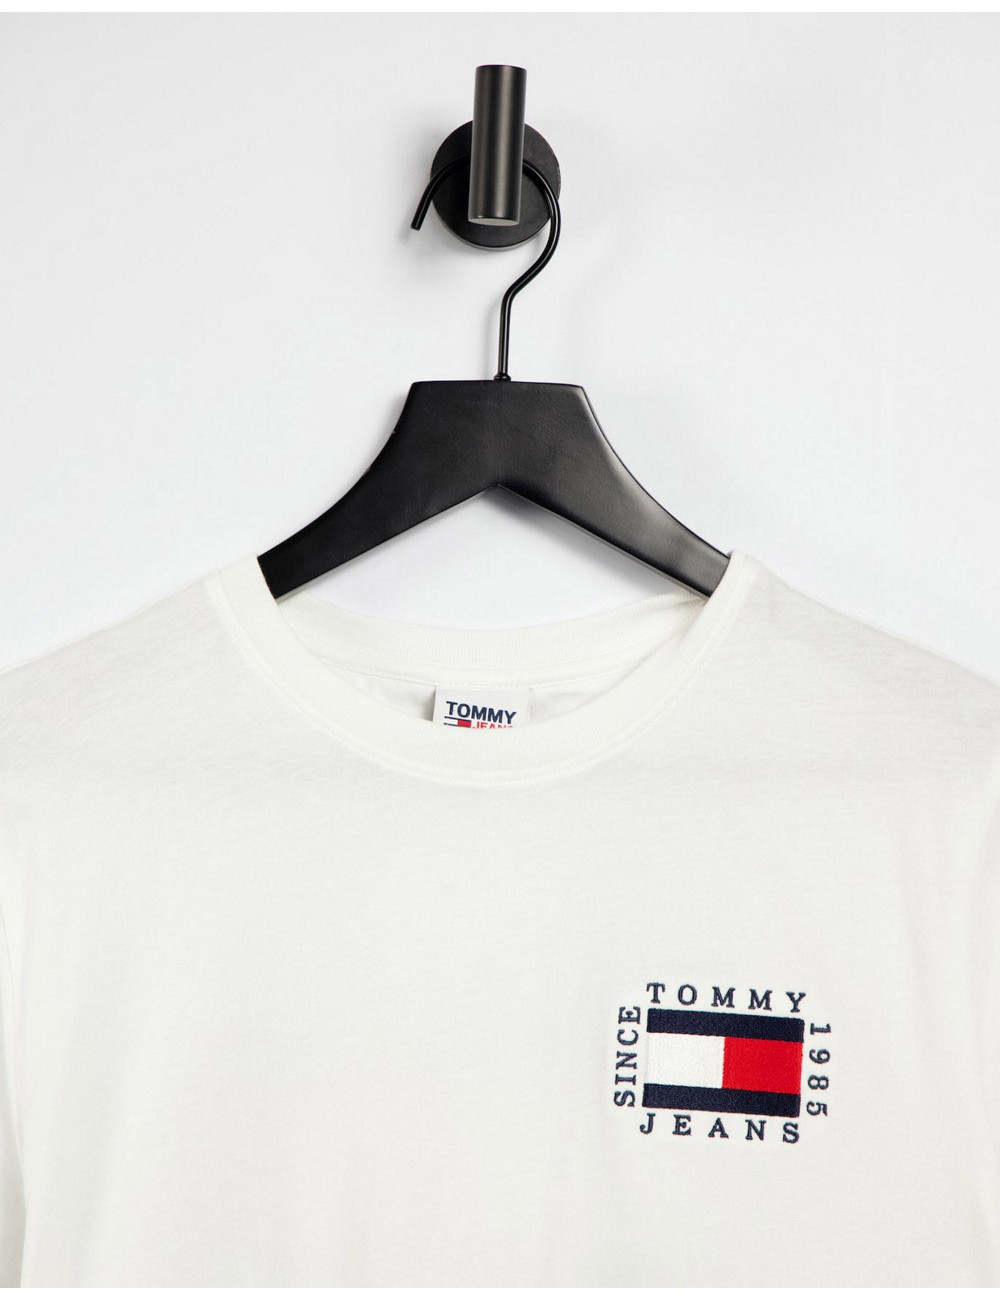 Tommy Jeans flag tee in white